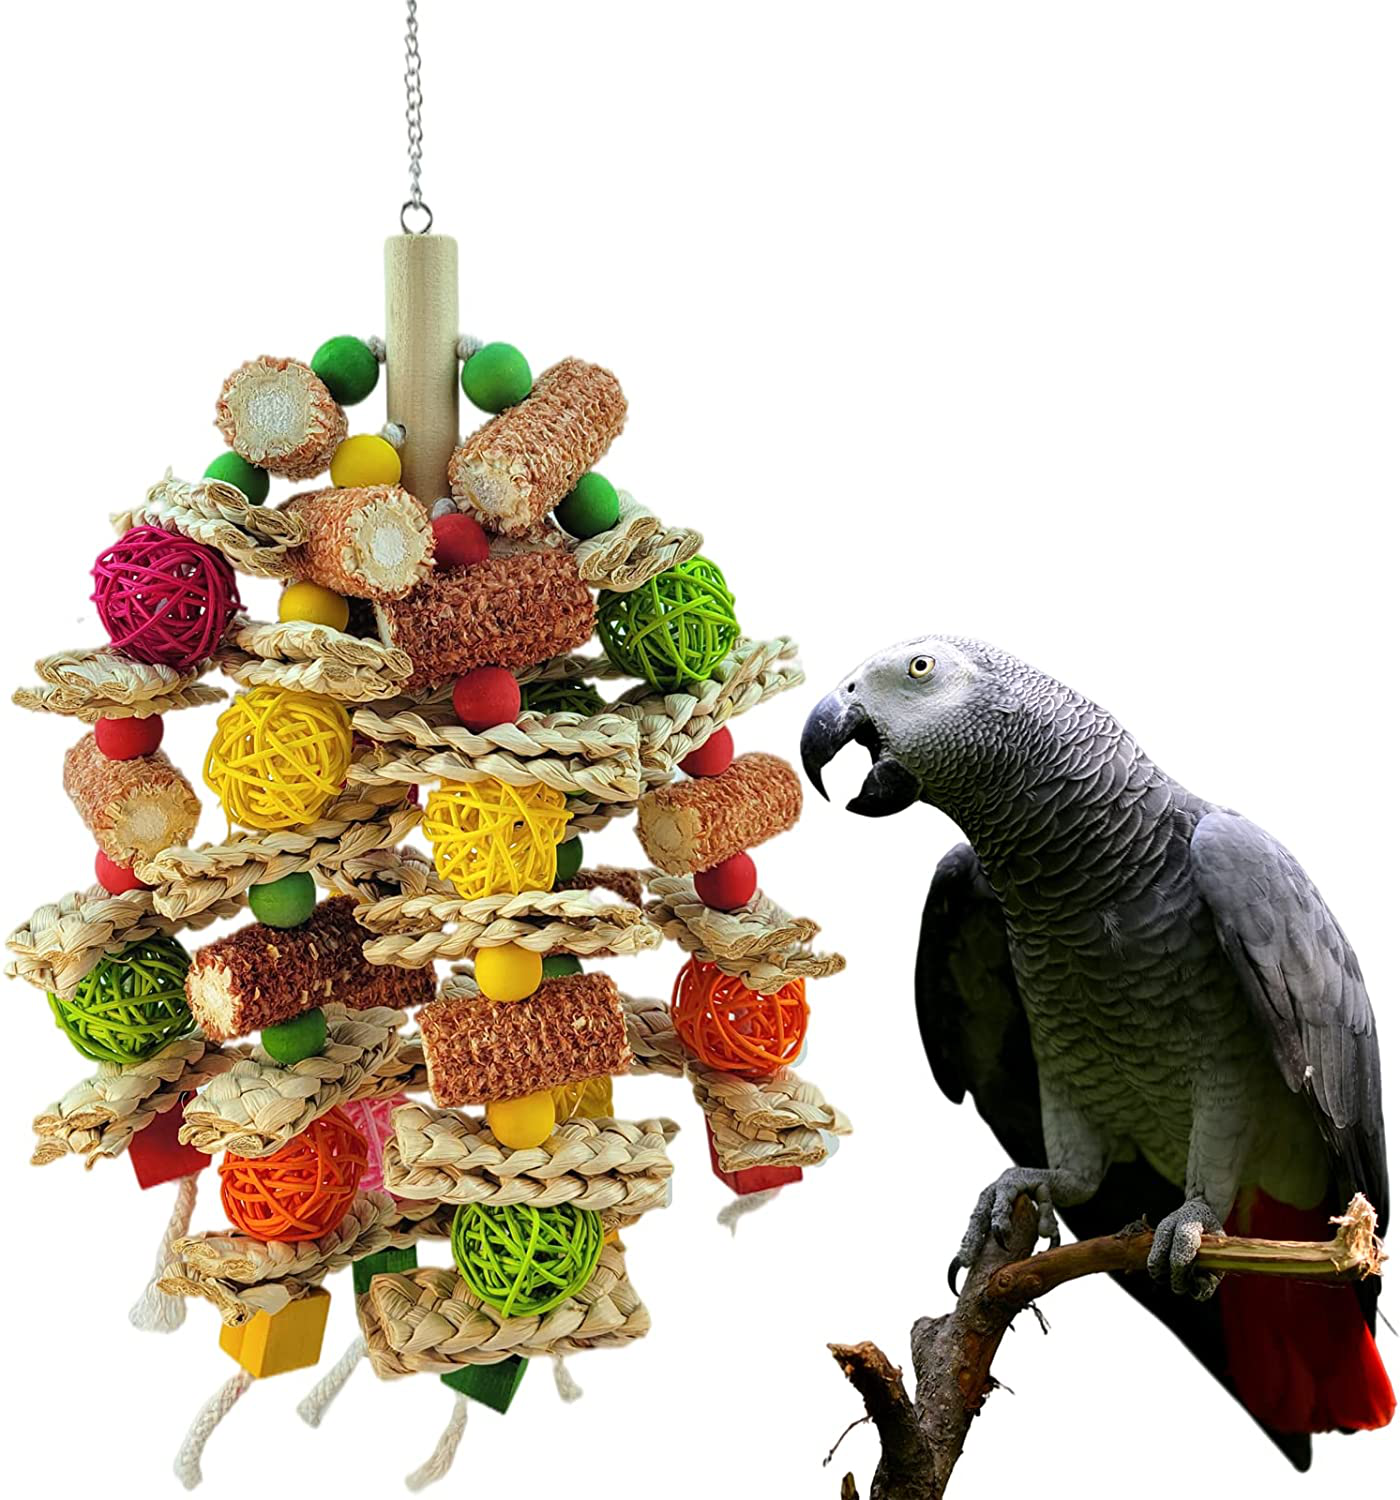 RF-X Parrot Toys, Natural Corn Cob Chewing Bird Toys, Macaws, African Grey Parrots and Various Amazon Parrot Bird Cage Accessories Toys, Love Birds Parrot Cage Toys (6 String Design)